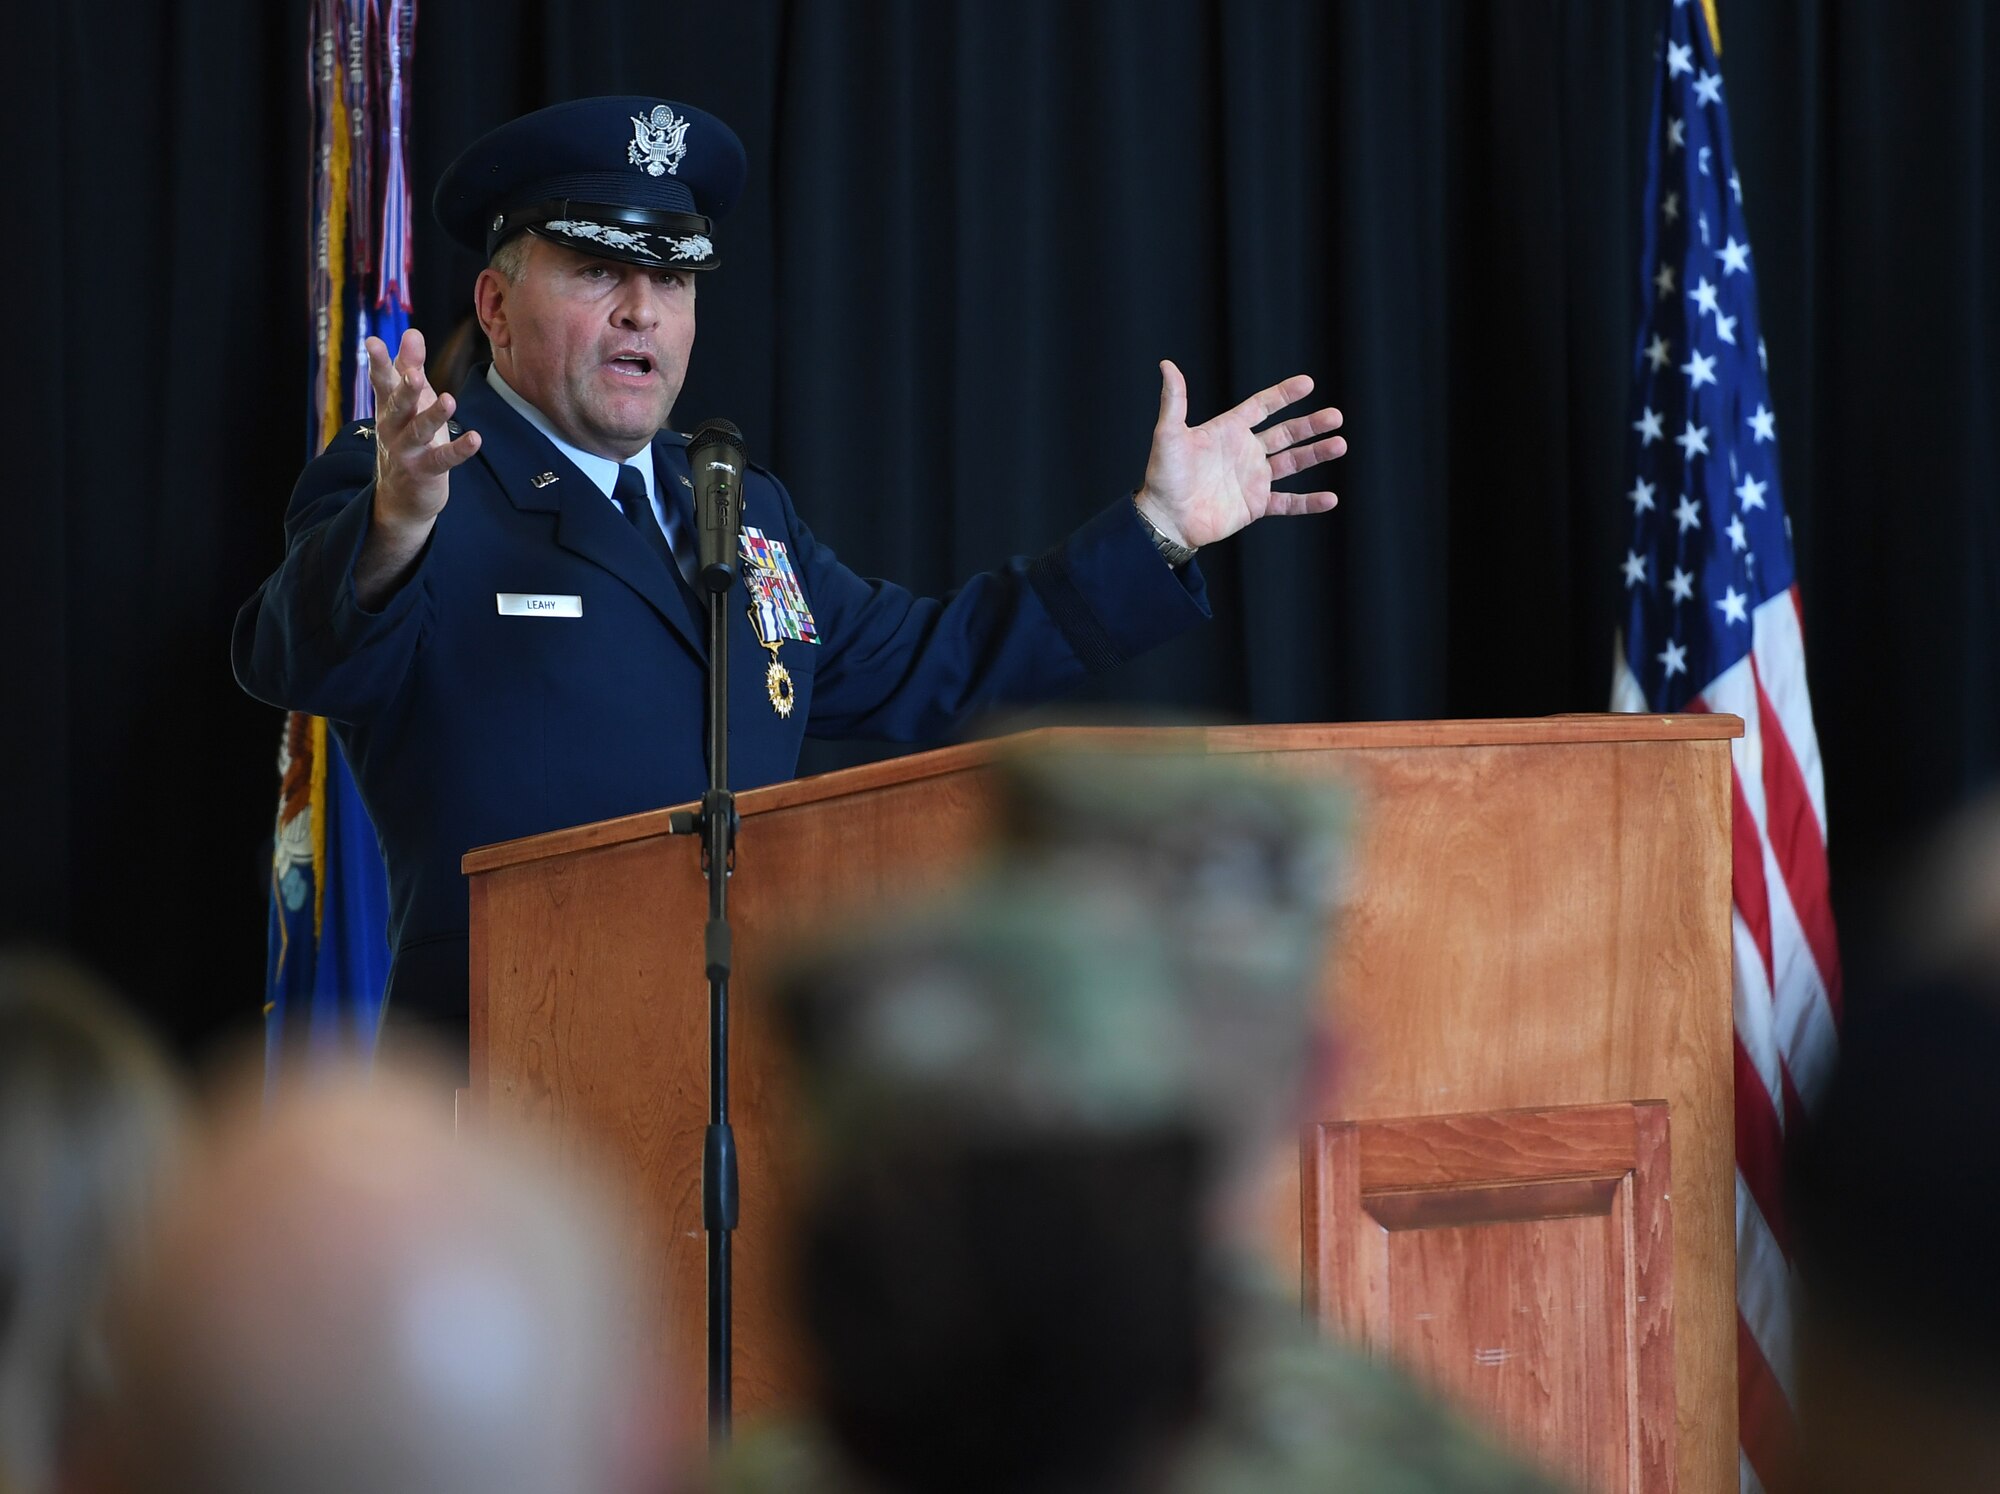 U.S. Air Force Maj. Gen. Timothy Leahy, Second Air Force commander, delivers remarks during the Second Air Force change of command ceremony on Keesler Air Force Base, Mississippi, Aug. 29, 2019. The ceremony is a symbol of command being exchanged from one commander to the next. Leahy relinquished command of the Second Air Force to Maj. Gen. Andrea Tullos. (U.S. Air Force photo by Kemberly Groue)